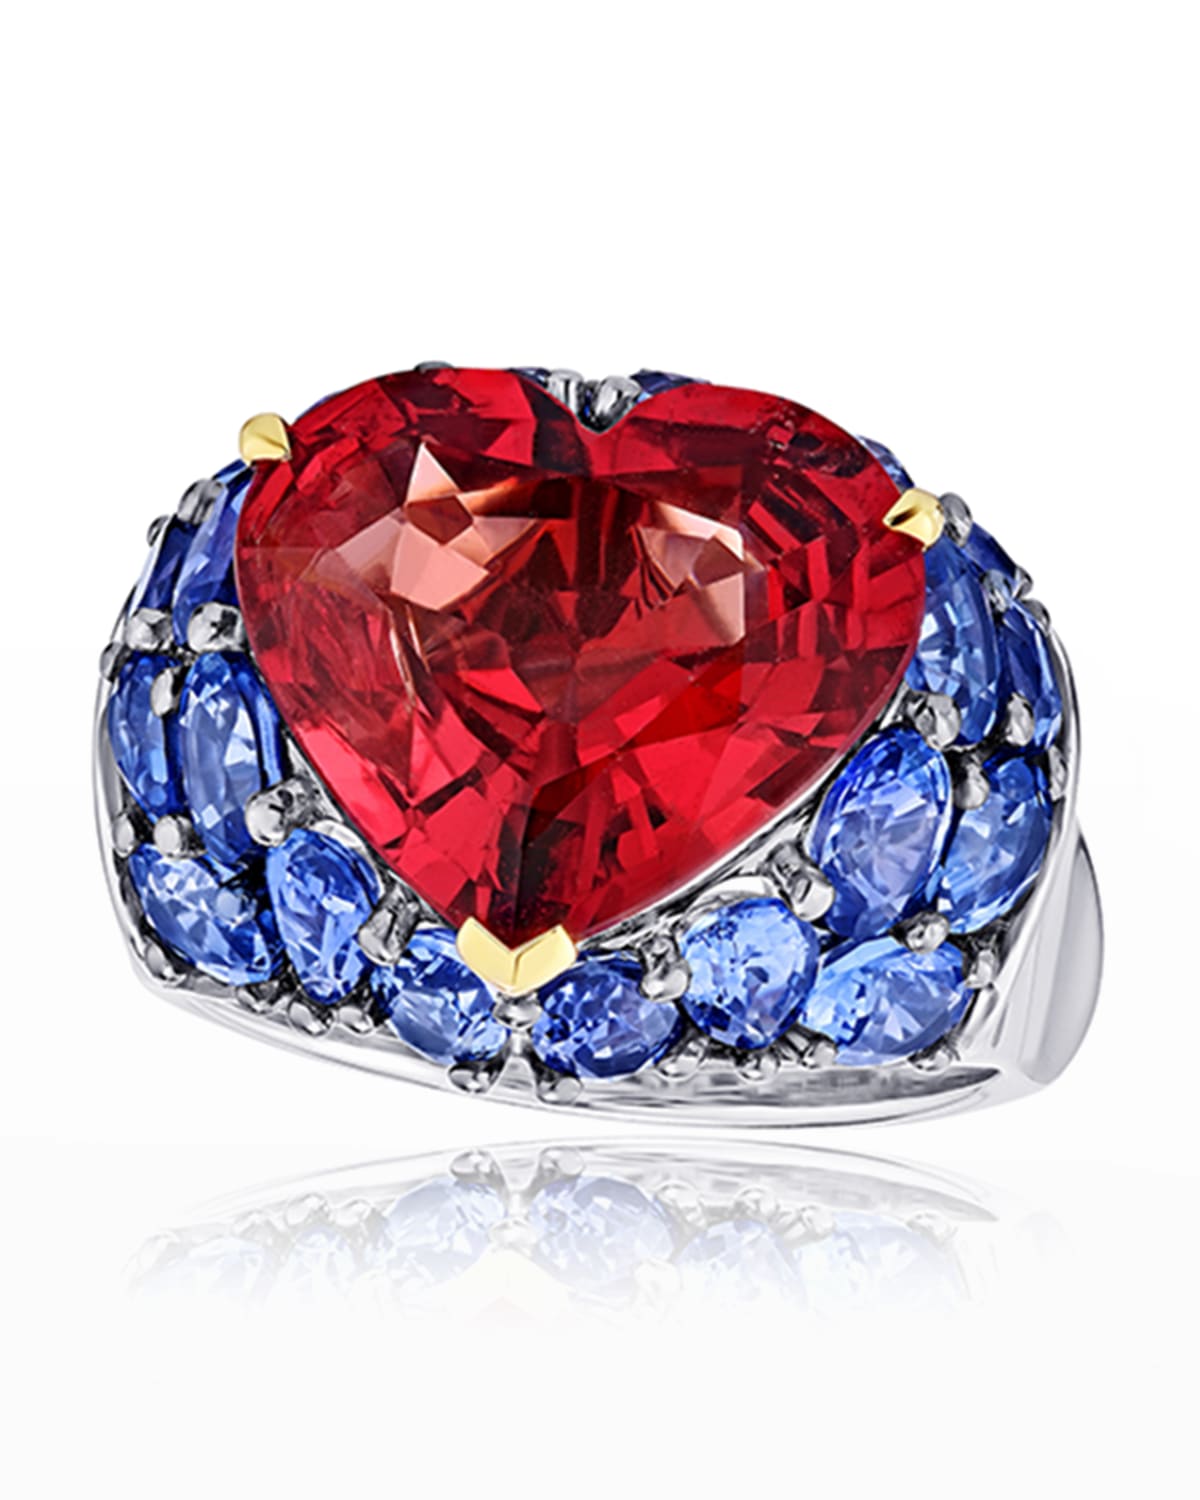 Alexander Laut Red Spinel and Blue Sapphire Ring, Size 6.5